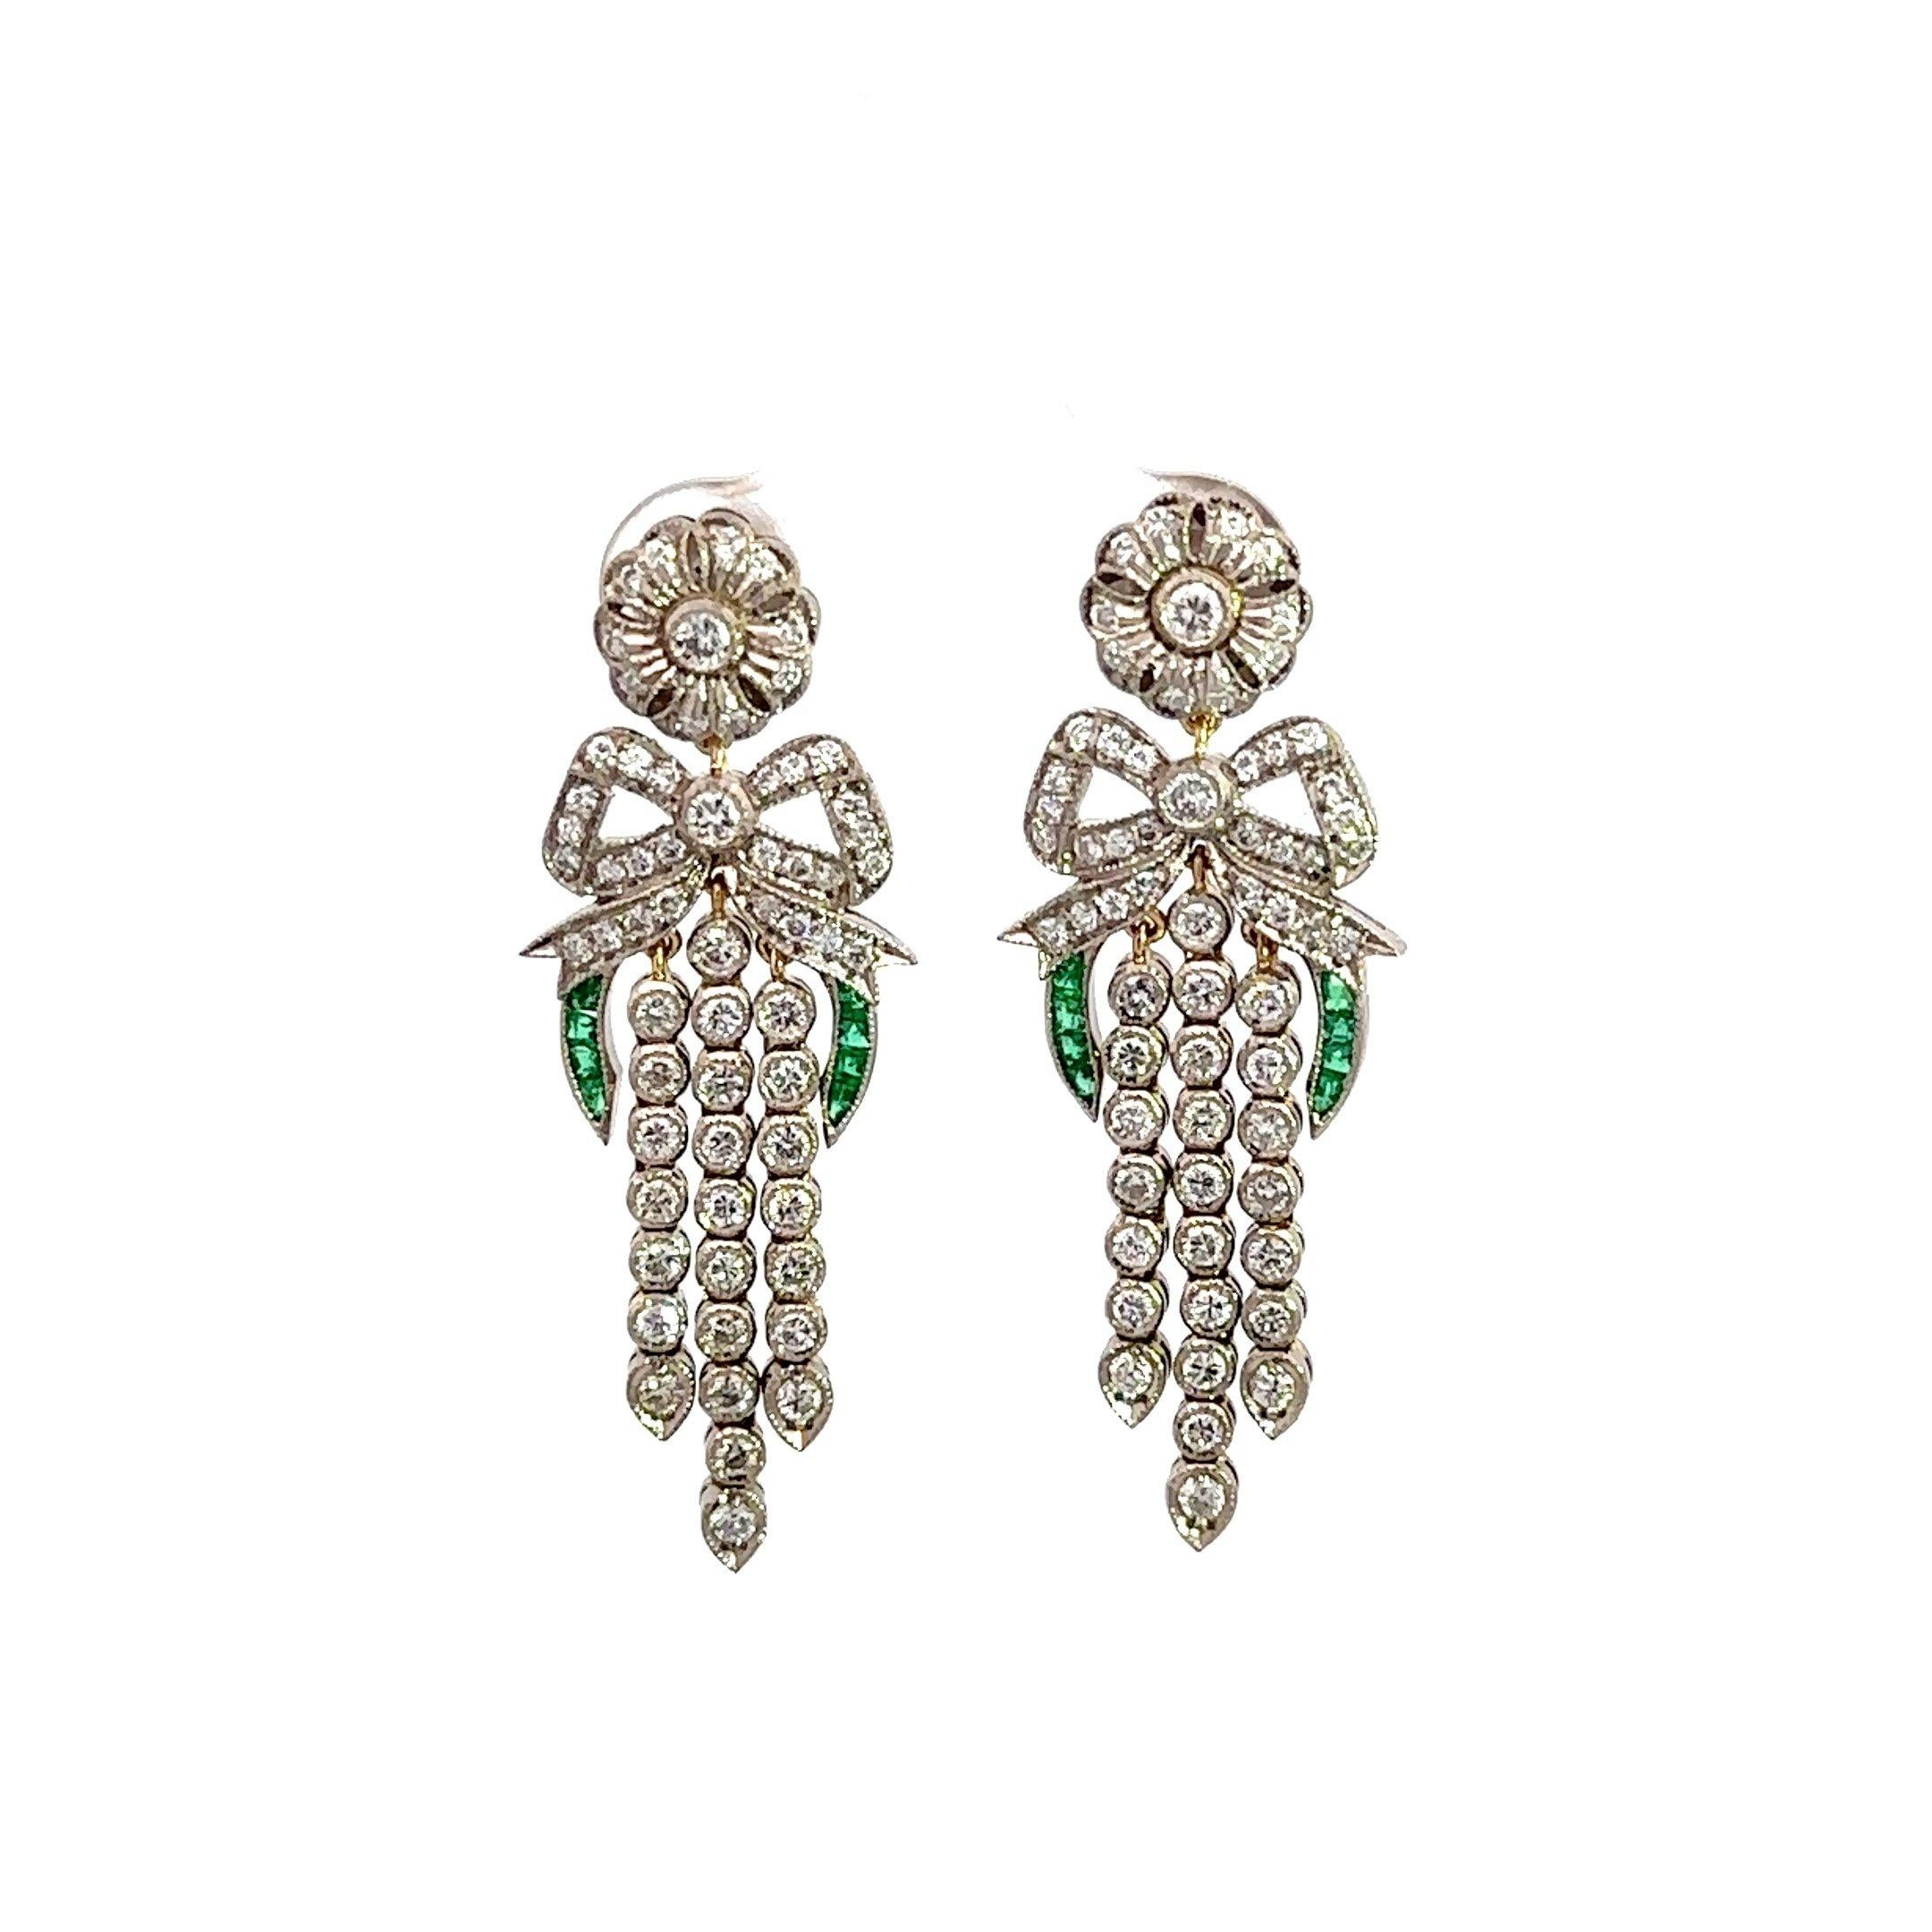 These vintage diamond chandelier earrings feature a bow and floral design motif and were crafted in the 1930's in 14KT white gold and 14KT yellow gold. The earrings feature approximately 2CT round diamonds , H-I Color, SI Clarity that adorn the